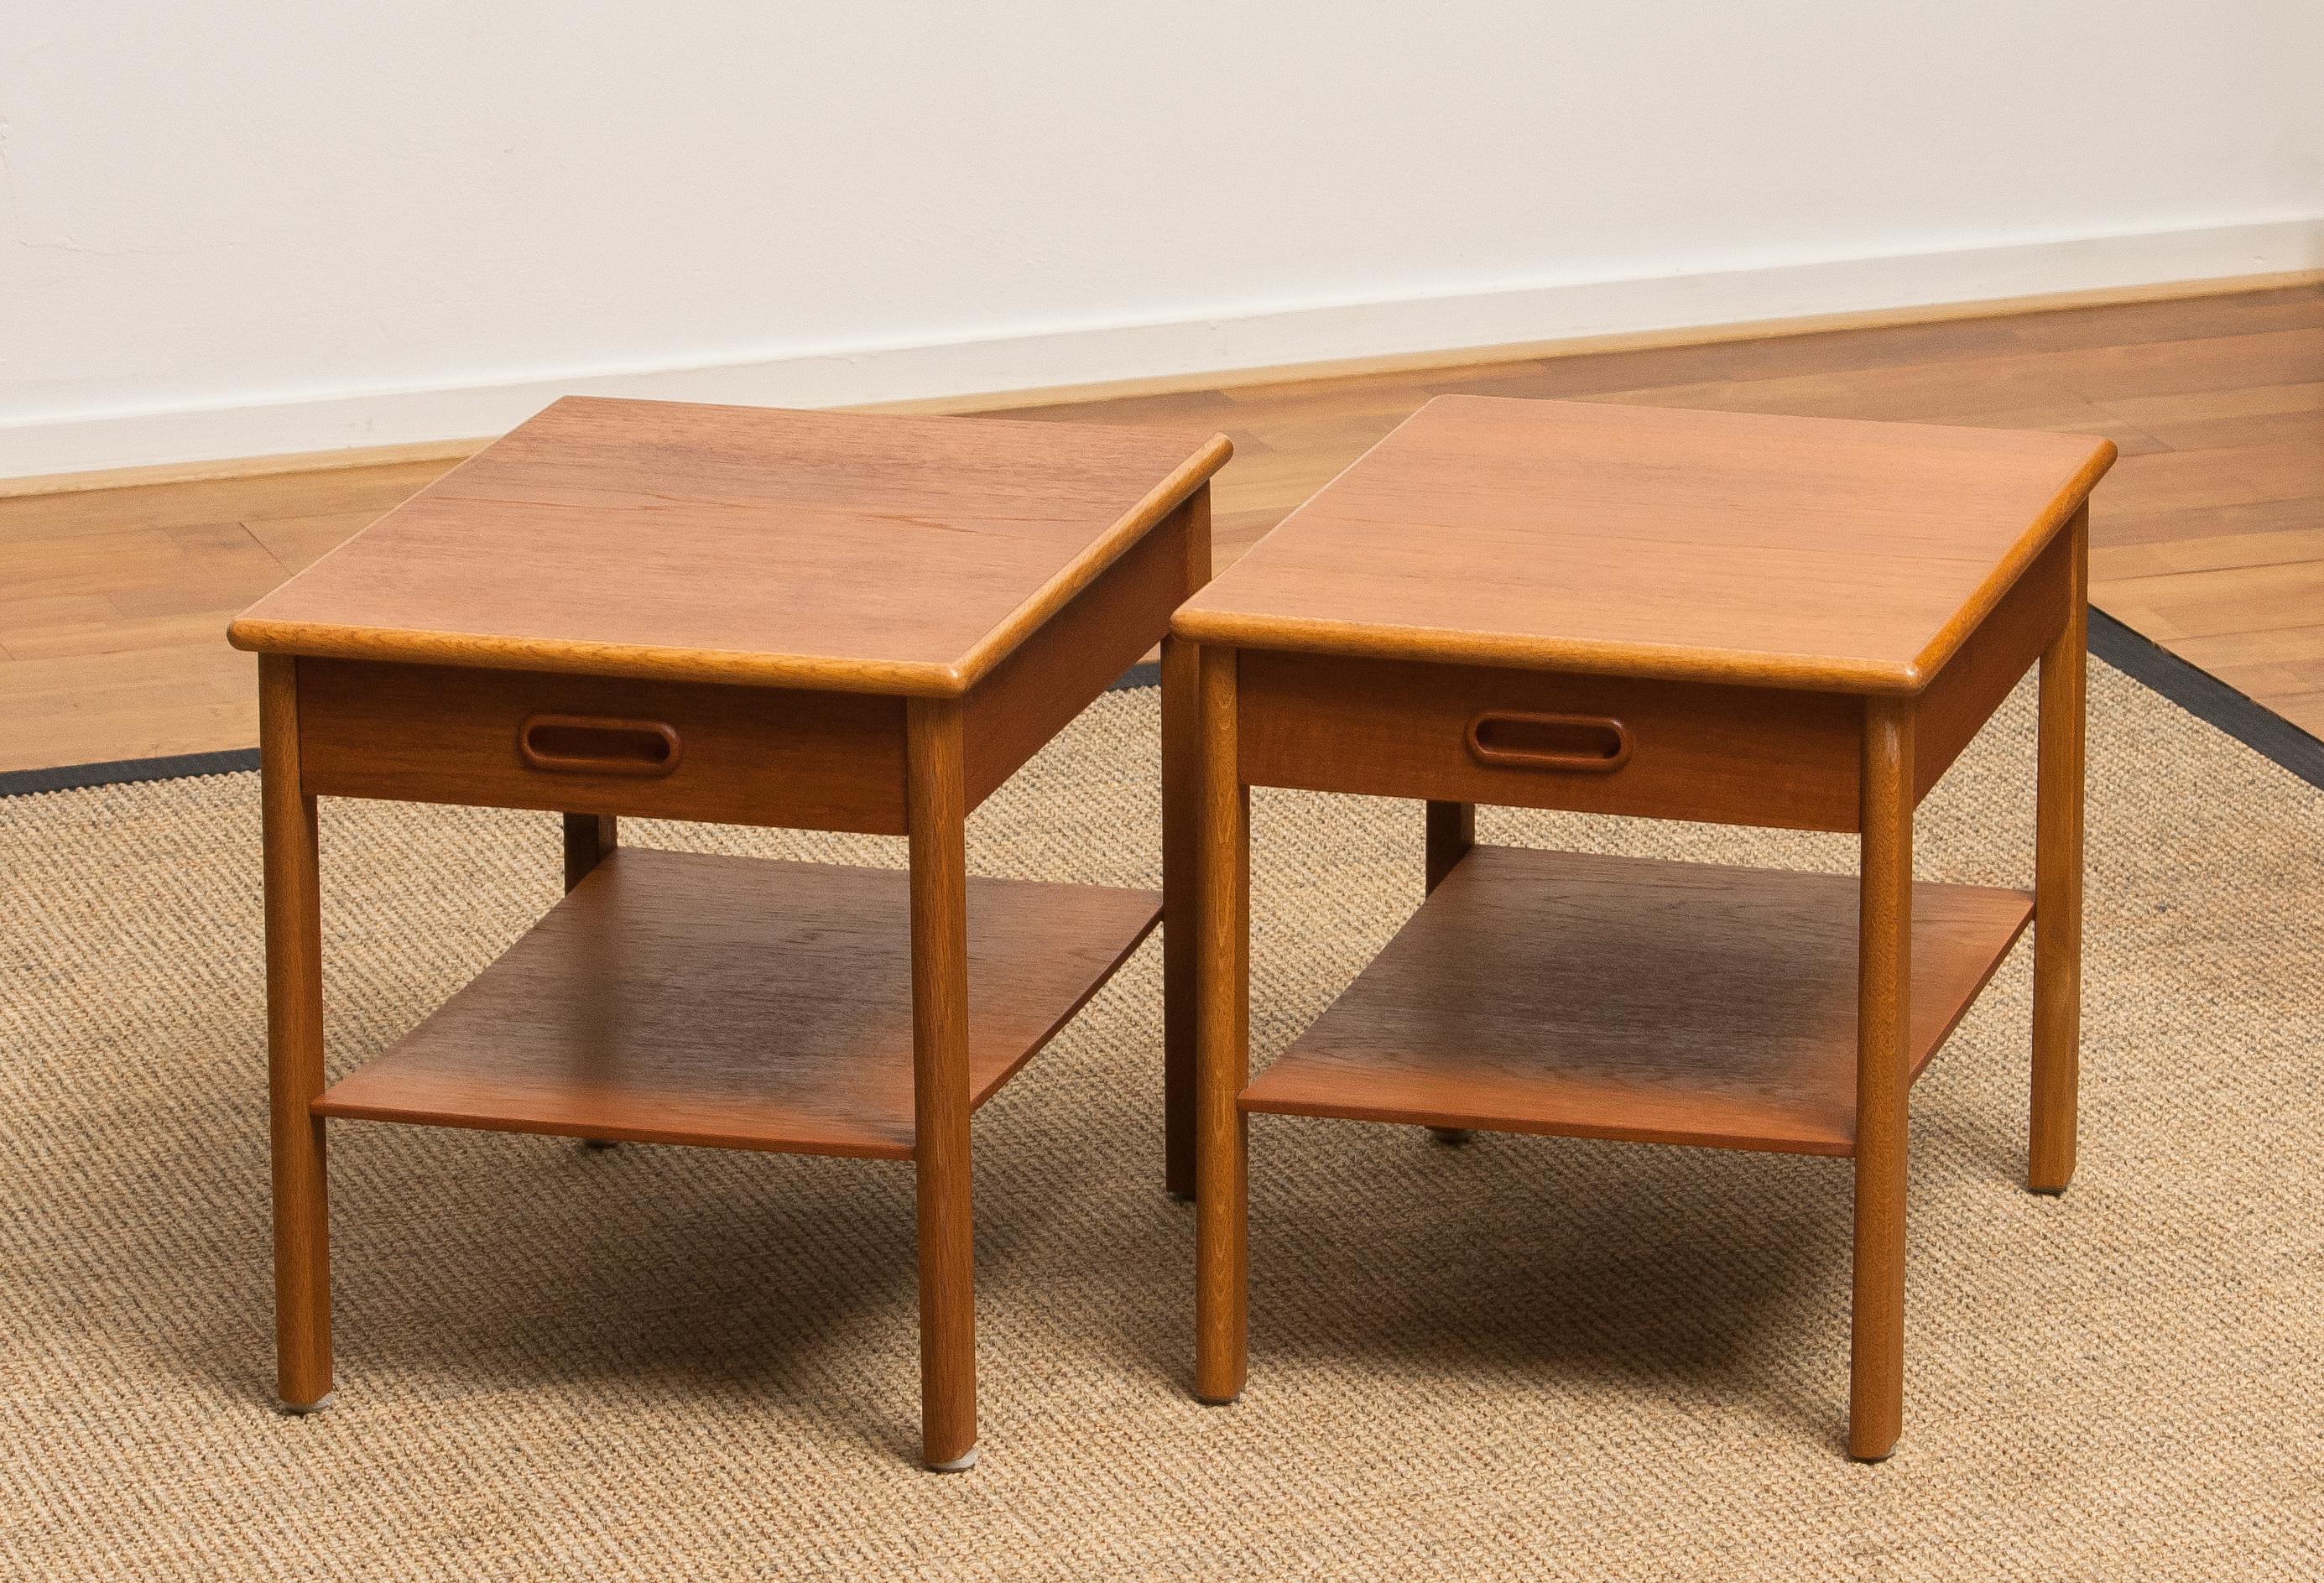 Beautiful pair of bedside tables from Sweden.
These tables are made of teak and they have a drawer.
They are in very nice condition.
Period 1950s.
Dimensions: H 39 cm, W 36 cm, D 48 cm.